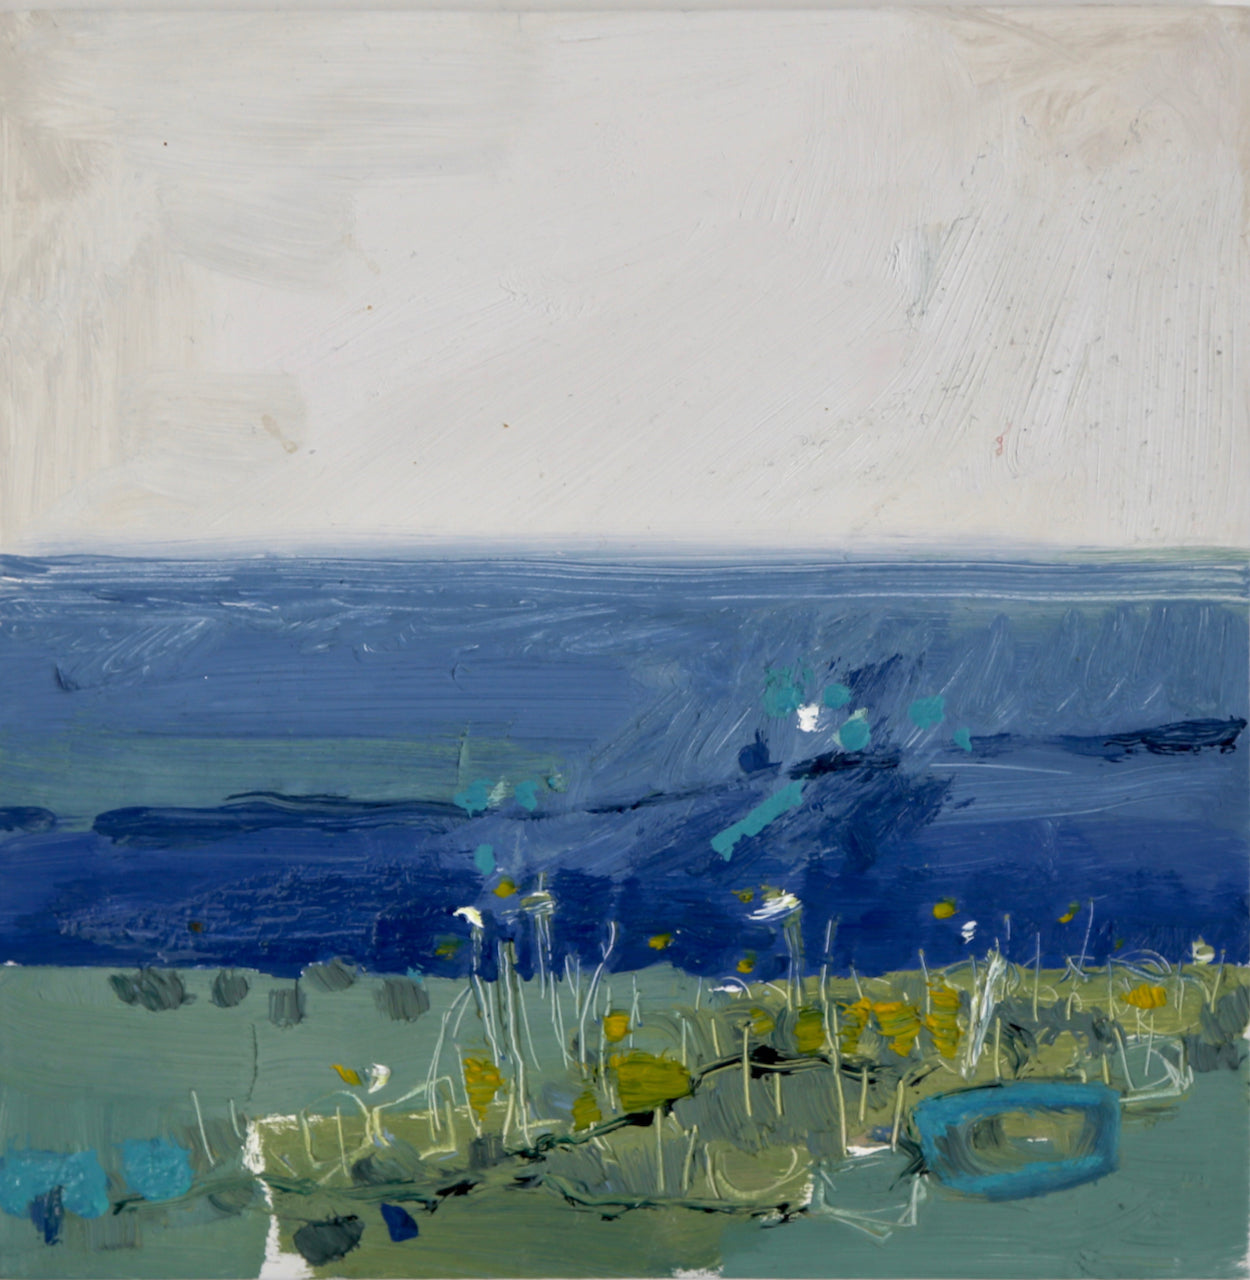 An abstract painting of Bay View by Aimee Willcock